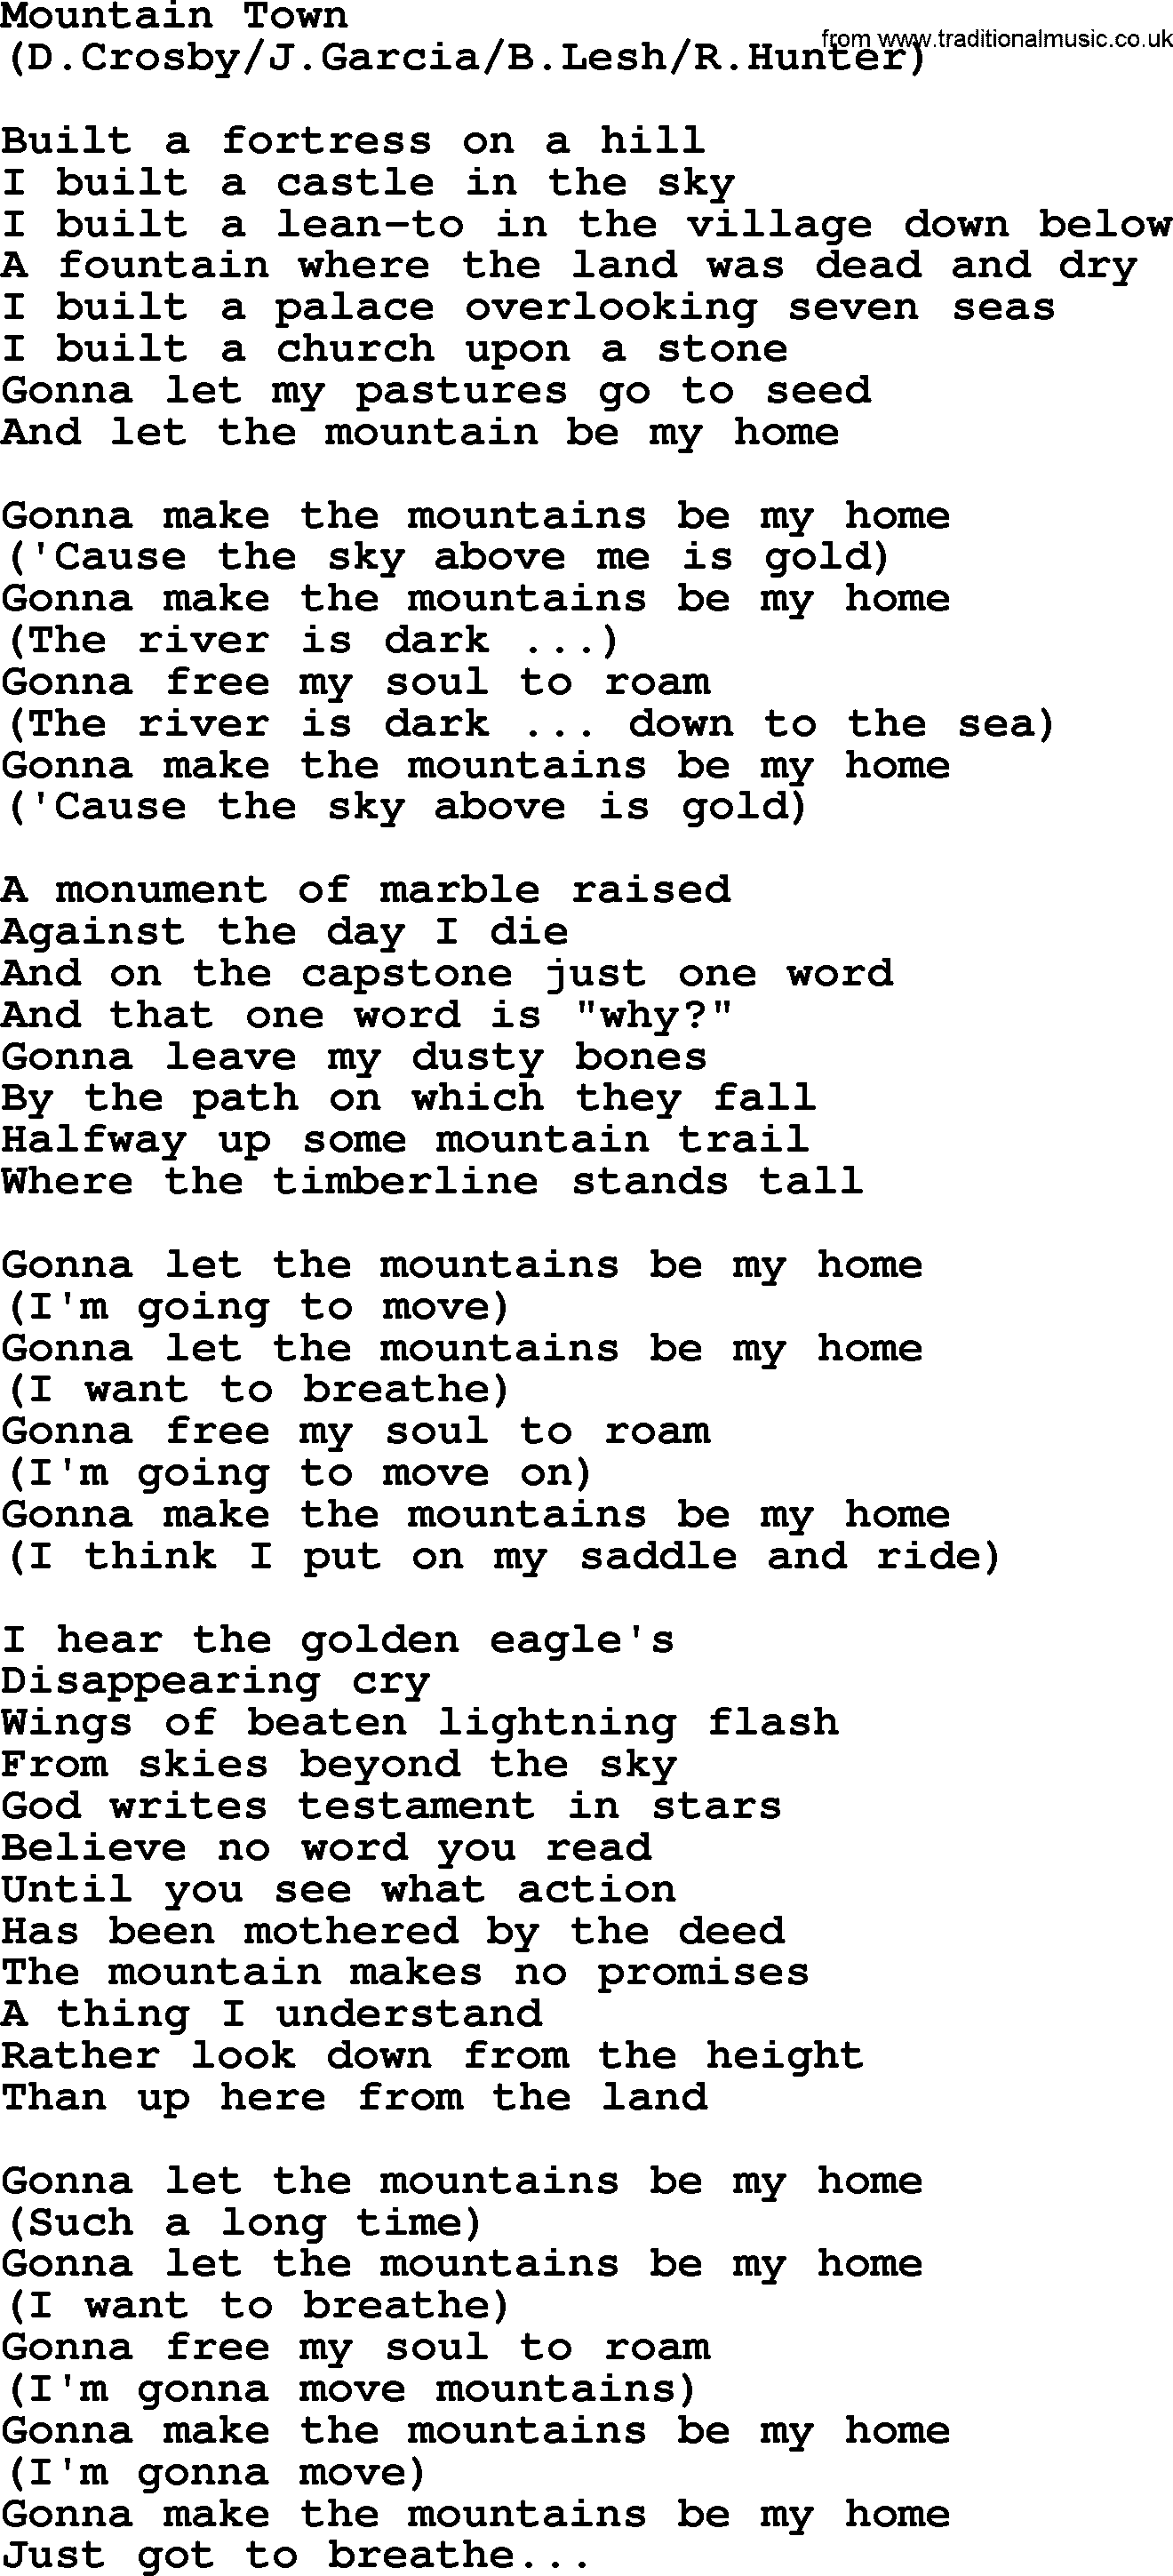 The Byrds song Mountain Town, lyrics